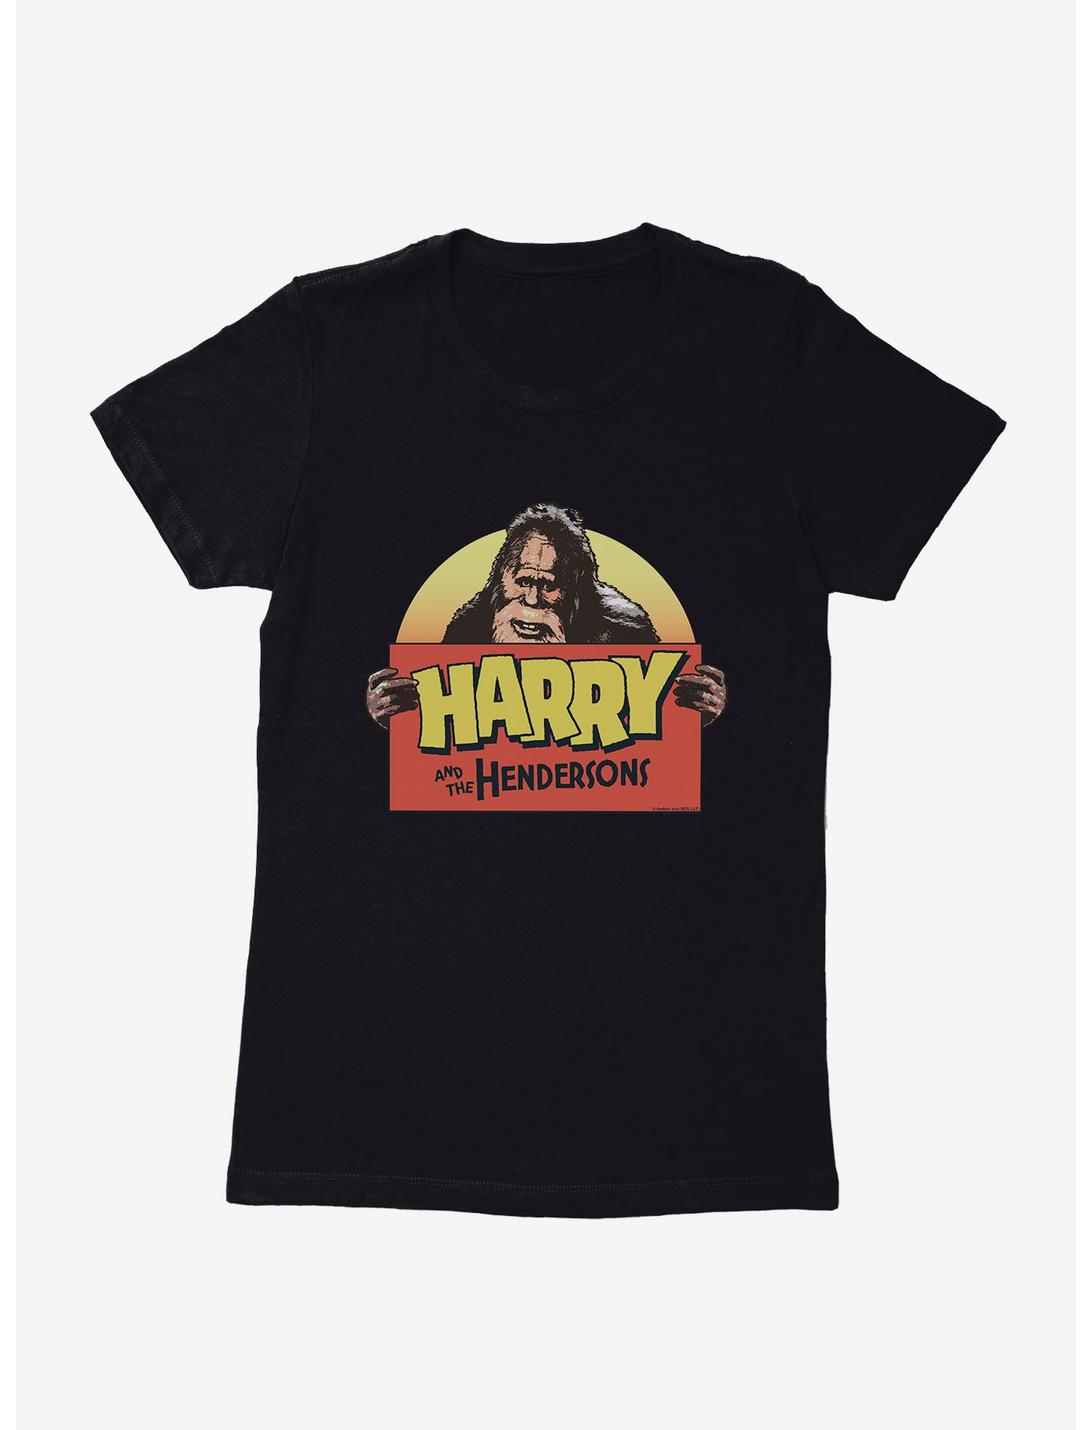 Harry And The Hendersons TV Show Logo Womens T-Shirt, BLACK, hi-res